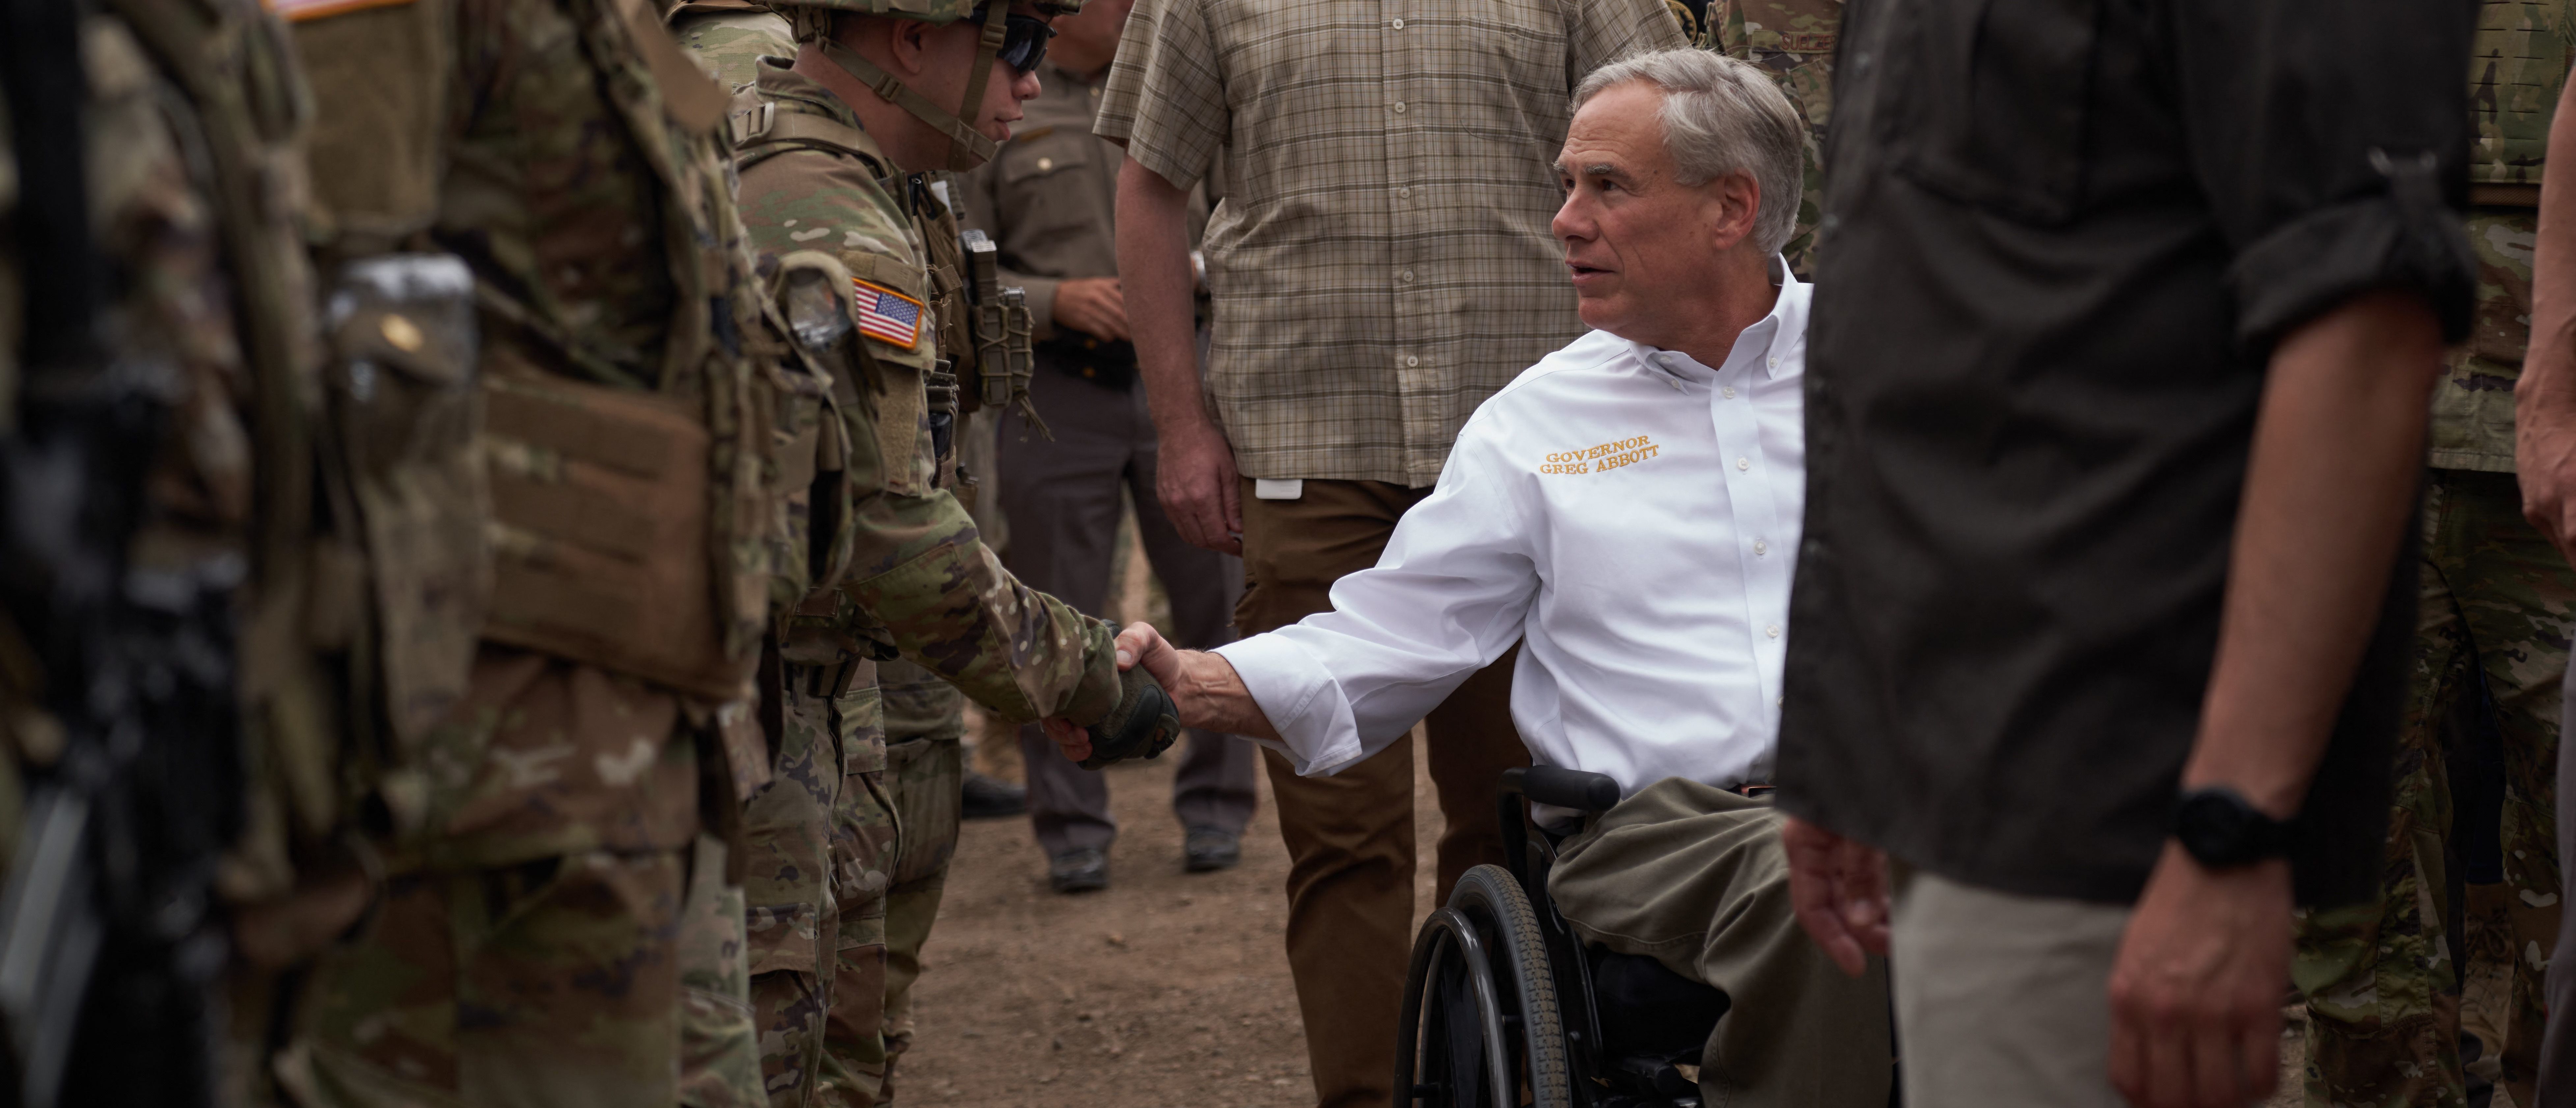 Texas Governor Greg Abbott tours the US-Mexico border at the Rio Grande River in Eagle Pass, Texas, on May 23, 2022. - A Louisiana federal judge blocked the Biden administration on Friday from ending Title 42, a pandemic-related border restriction that allows for the immediate expulsion of asylum-seekers and other migrants. (Photo by allison dinner / AFP) (Photo by ALLISON DINNER/AFP via Getty Images)